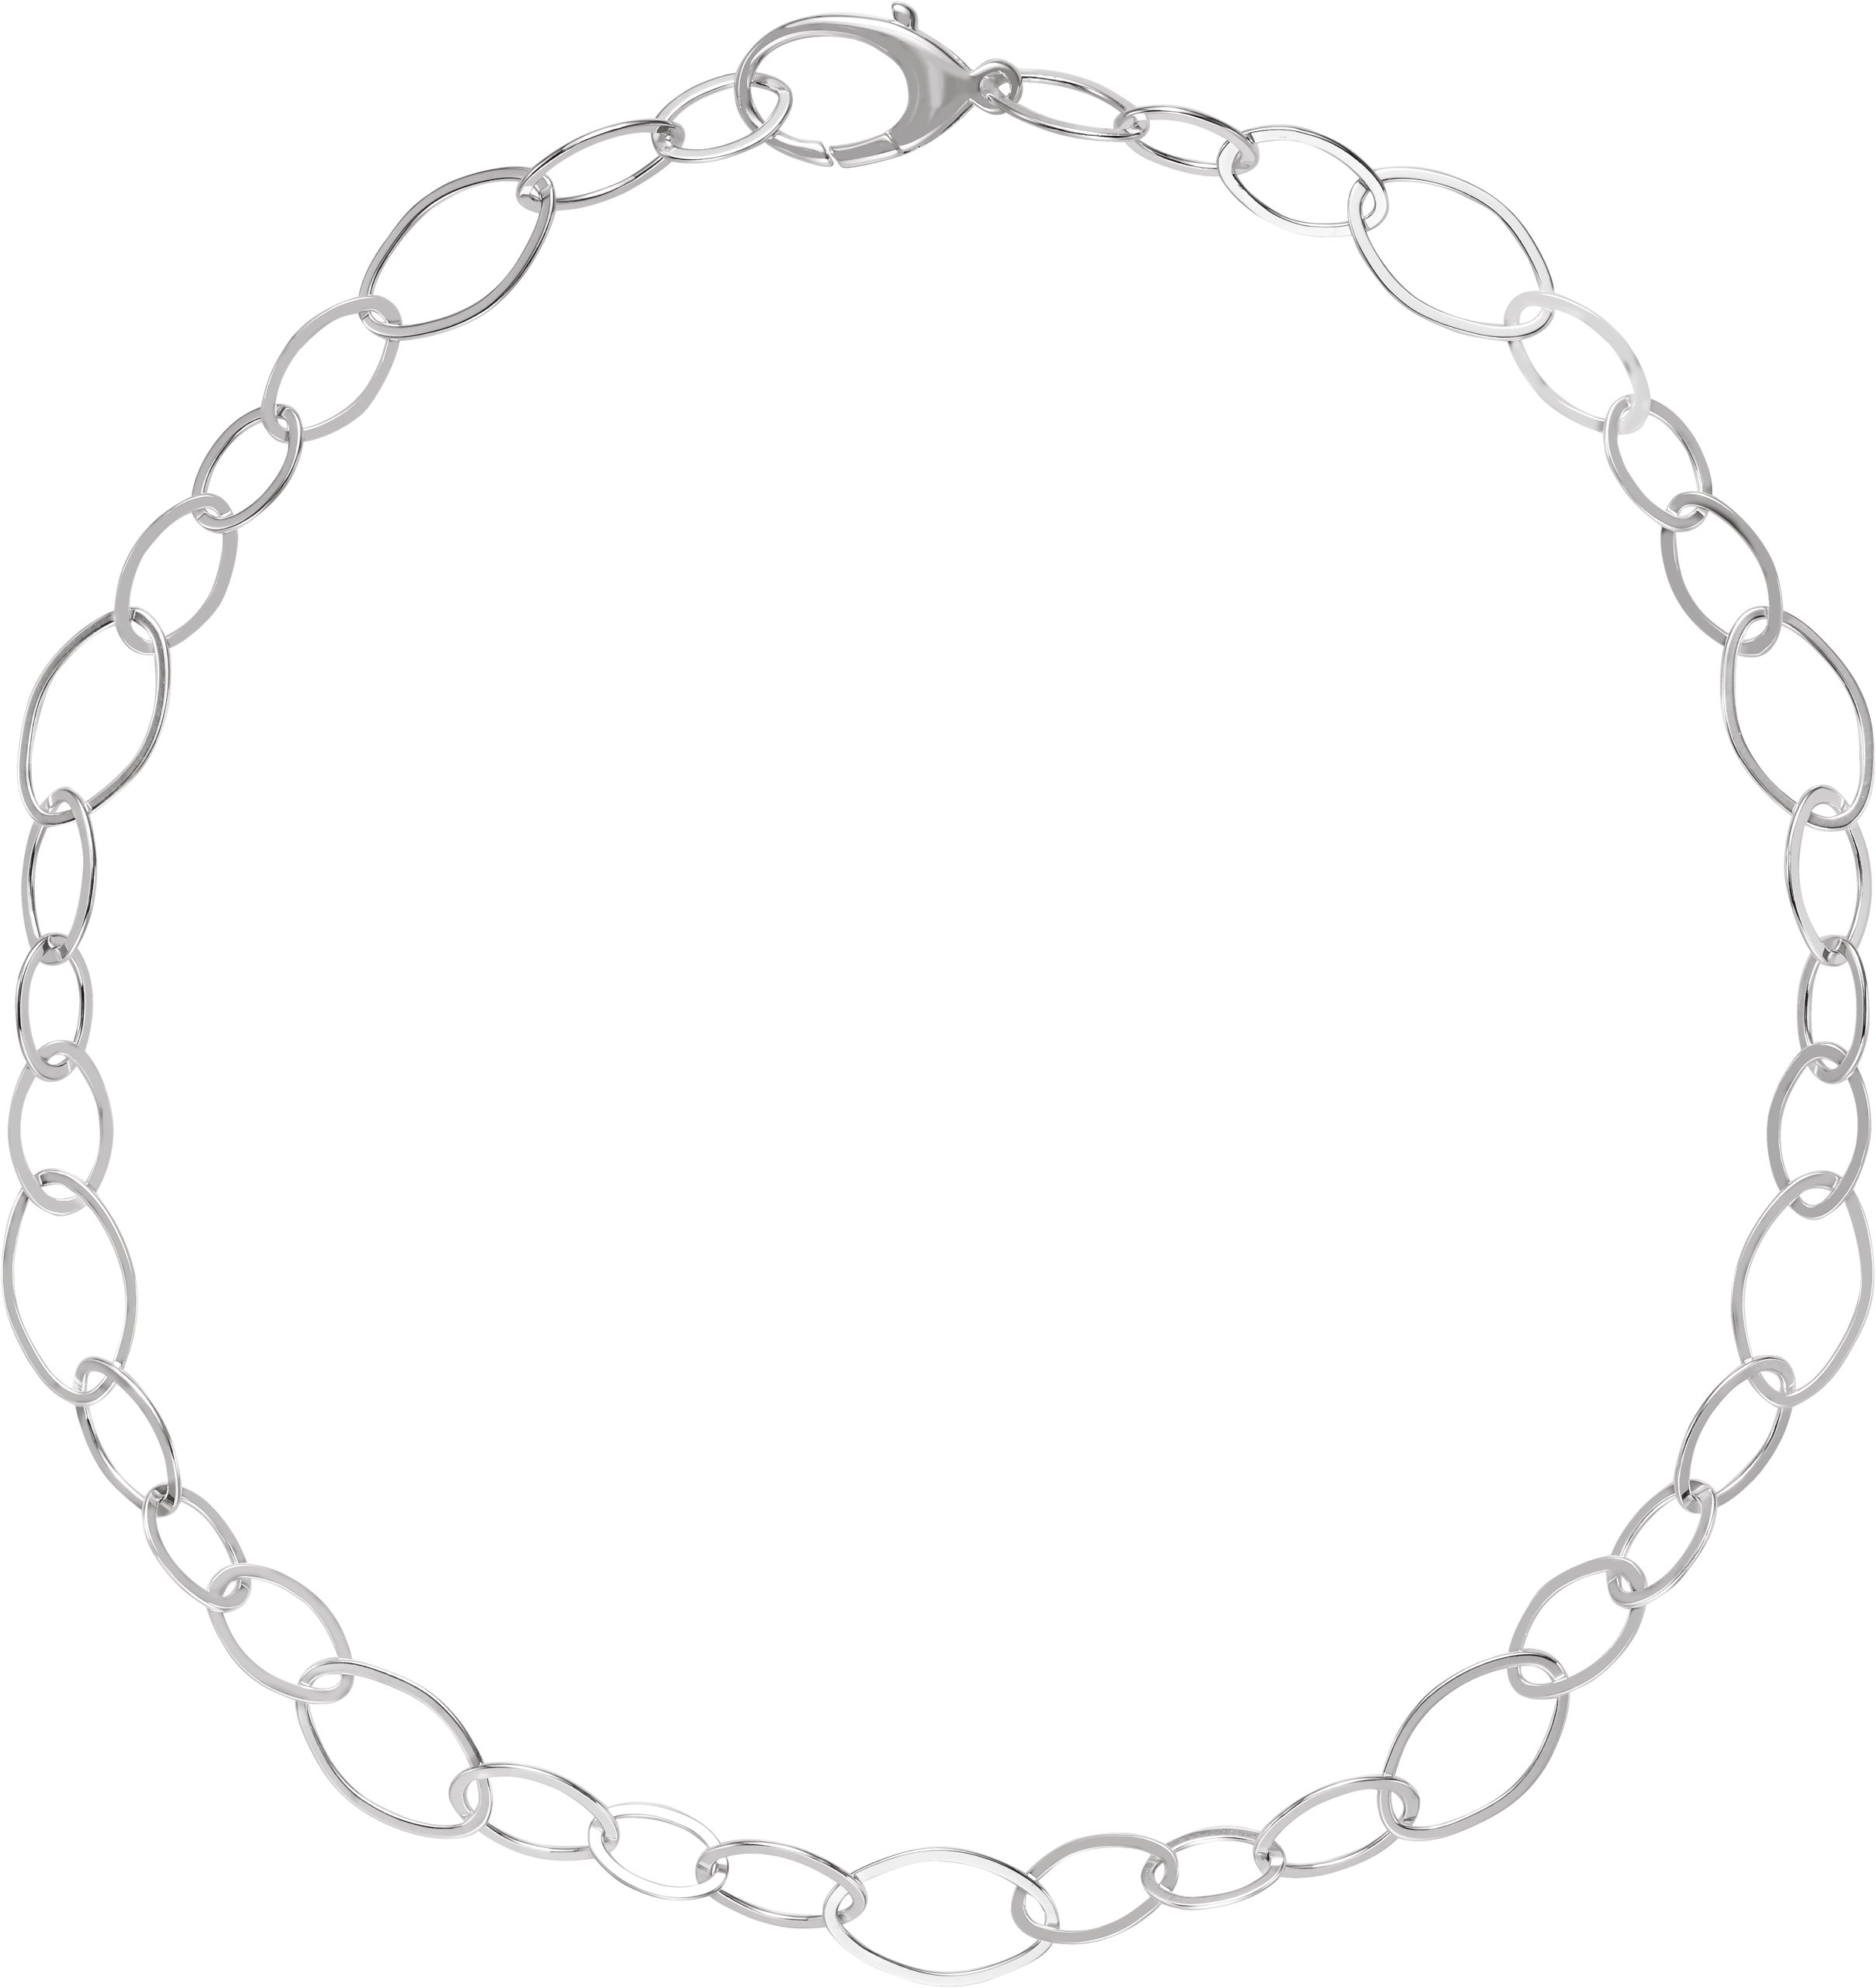 Sterling Silver Link 18 inch Necklace Ref. 2991928